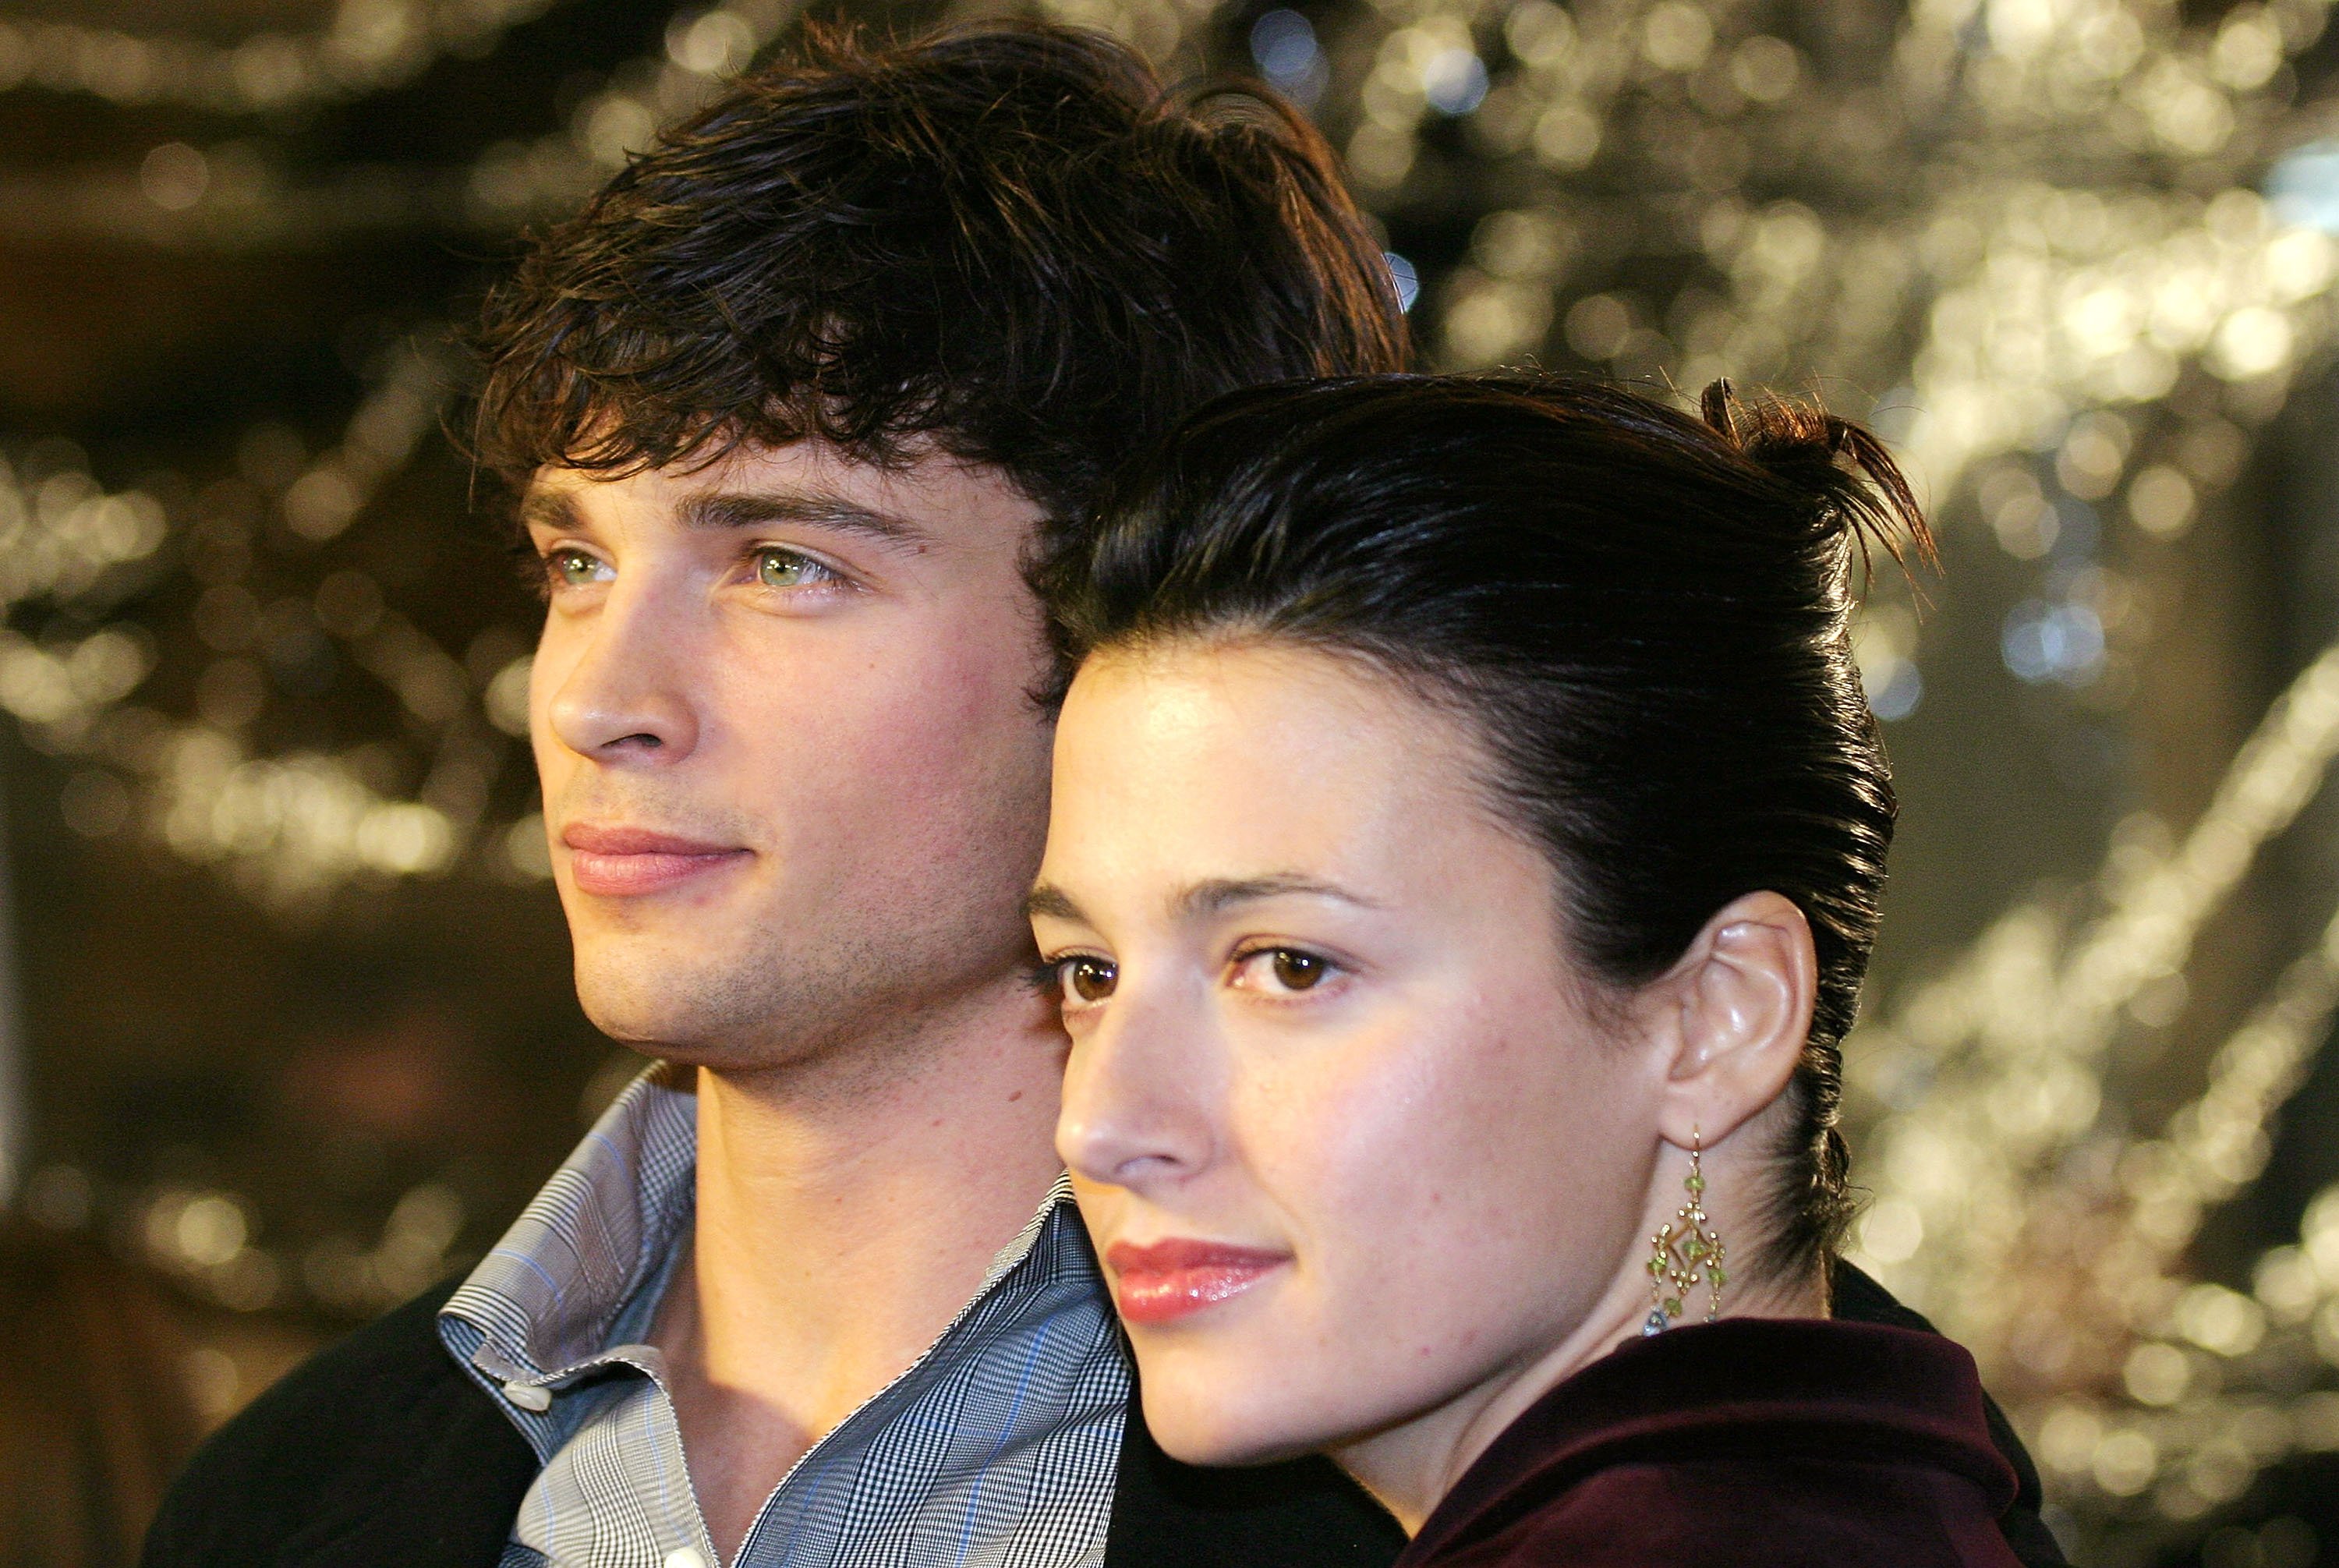 Tom Welling and Jamie White attend the "Cheaper By The Dozen" premiere on December 14, 2003 in Hollywood, California. I Source: Getty Images